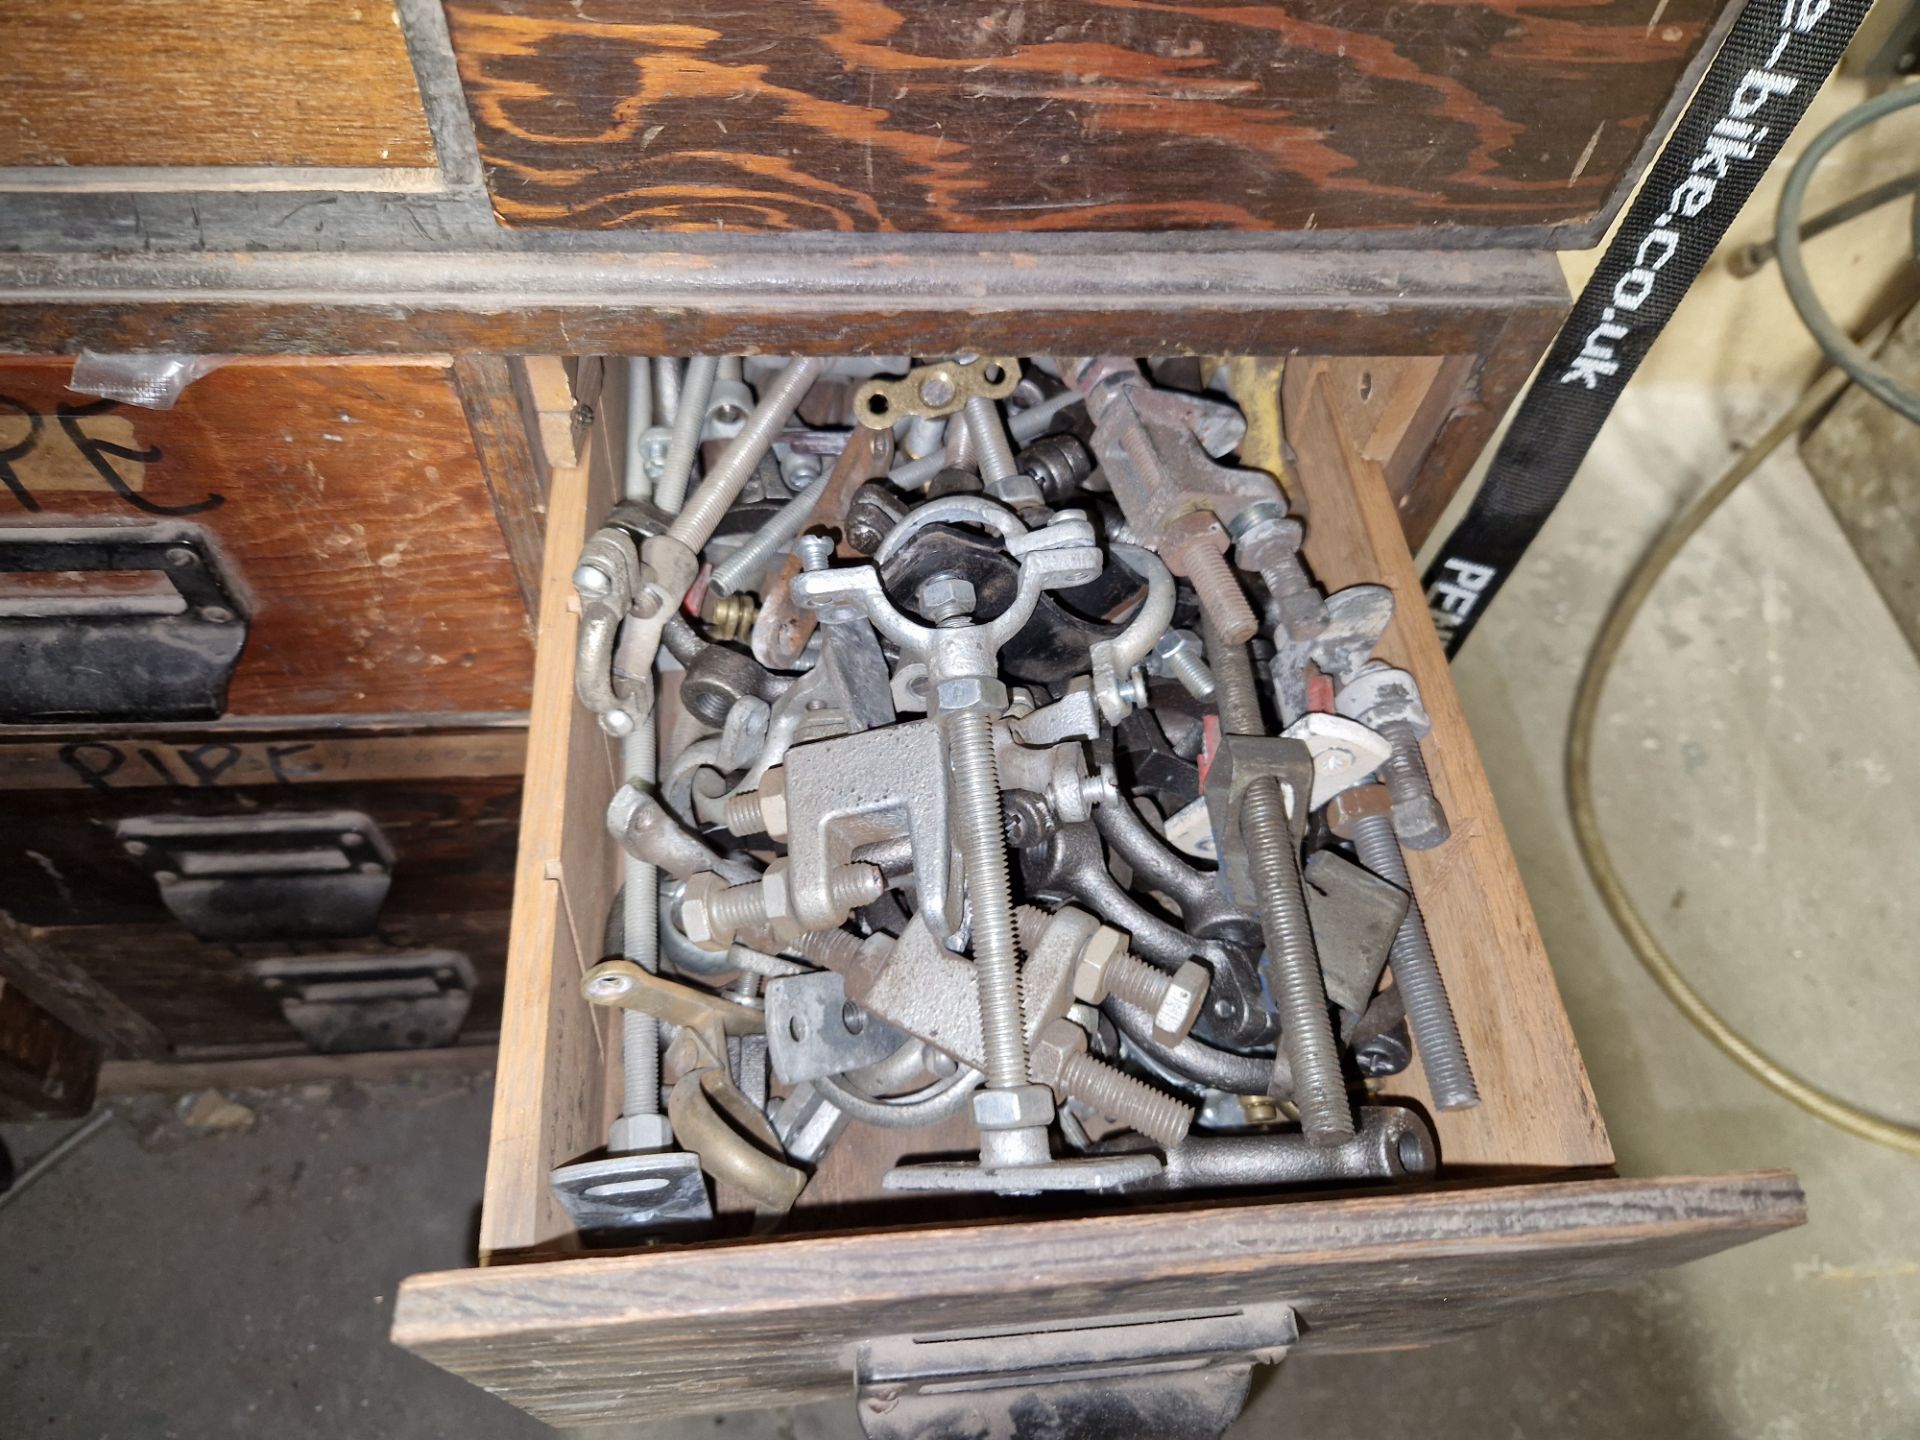 Five 6 Drawer Wooden Cabinets and Contents, including Pipe Fittings, Steel Components, Welding - Image 5 of 6